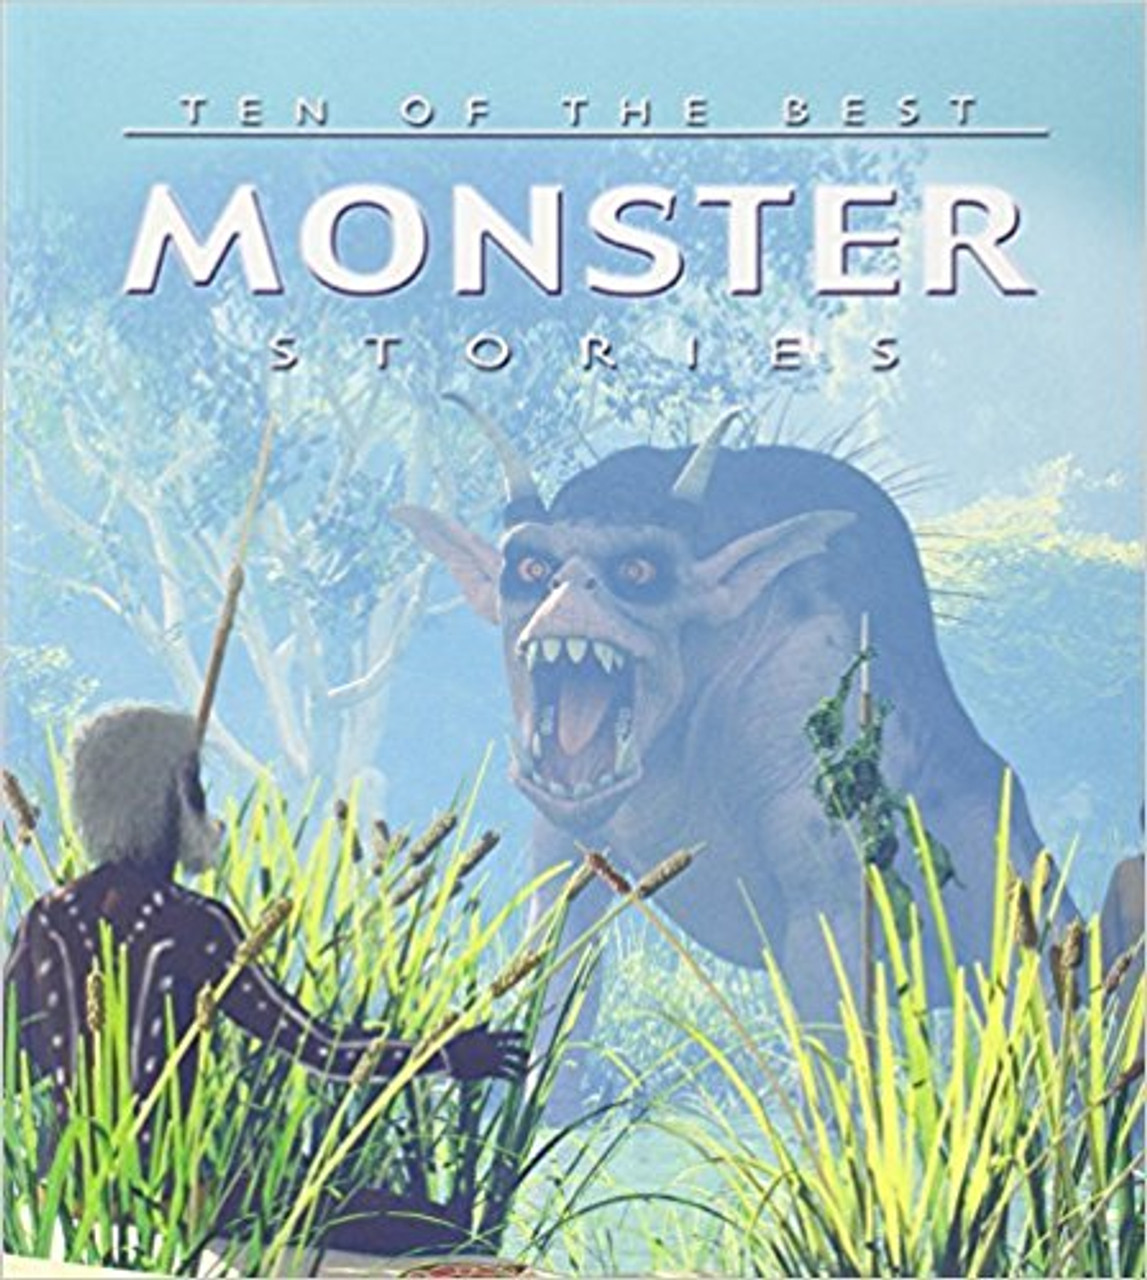 Ten of the Best Monster Stories (Paperback) by David West